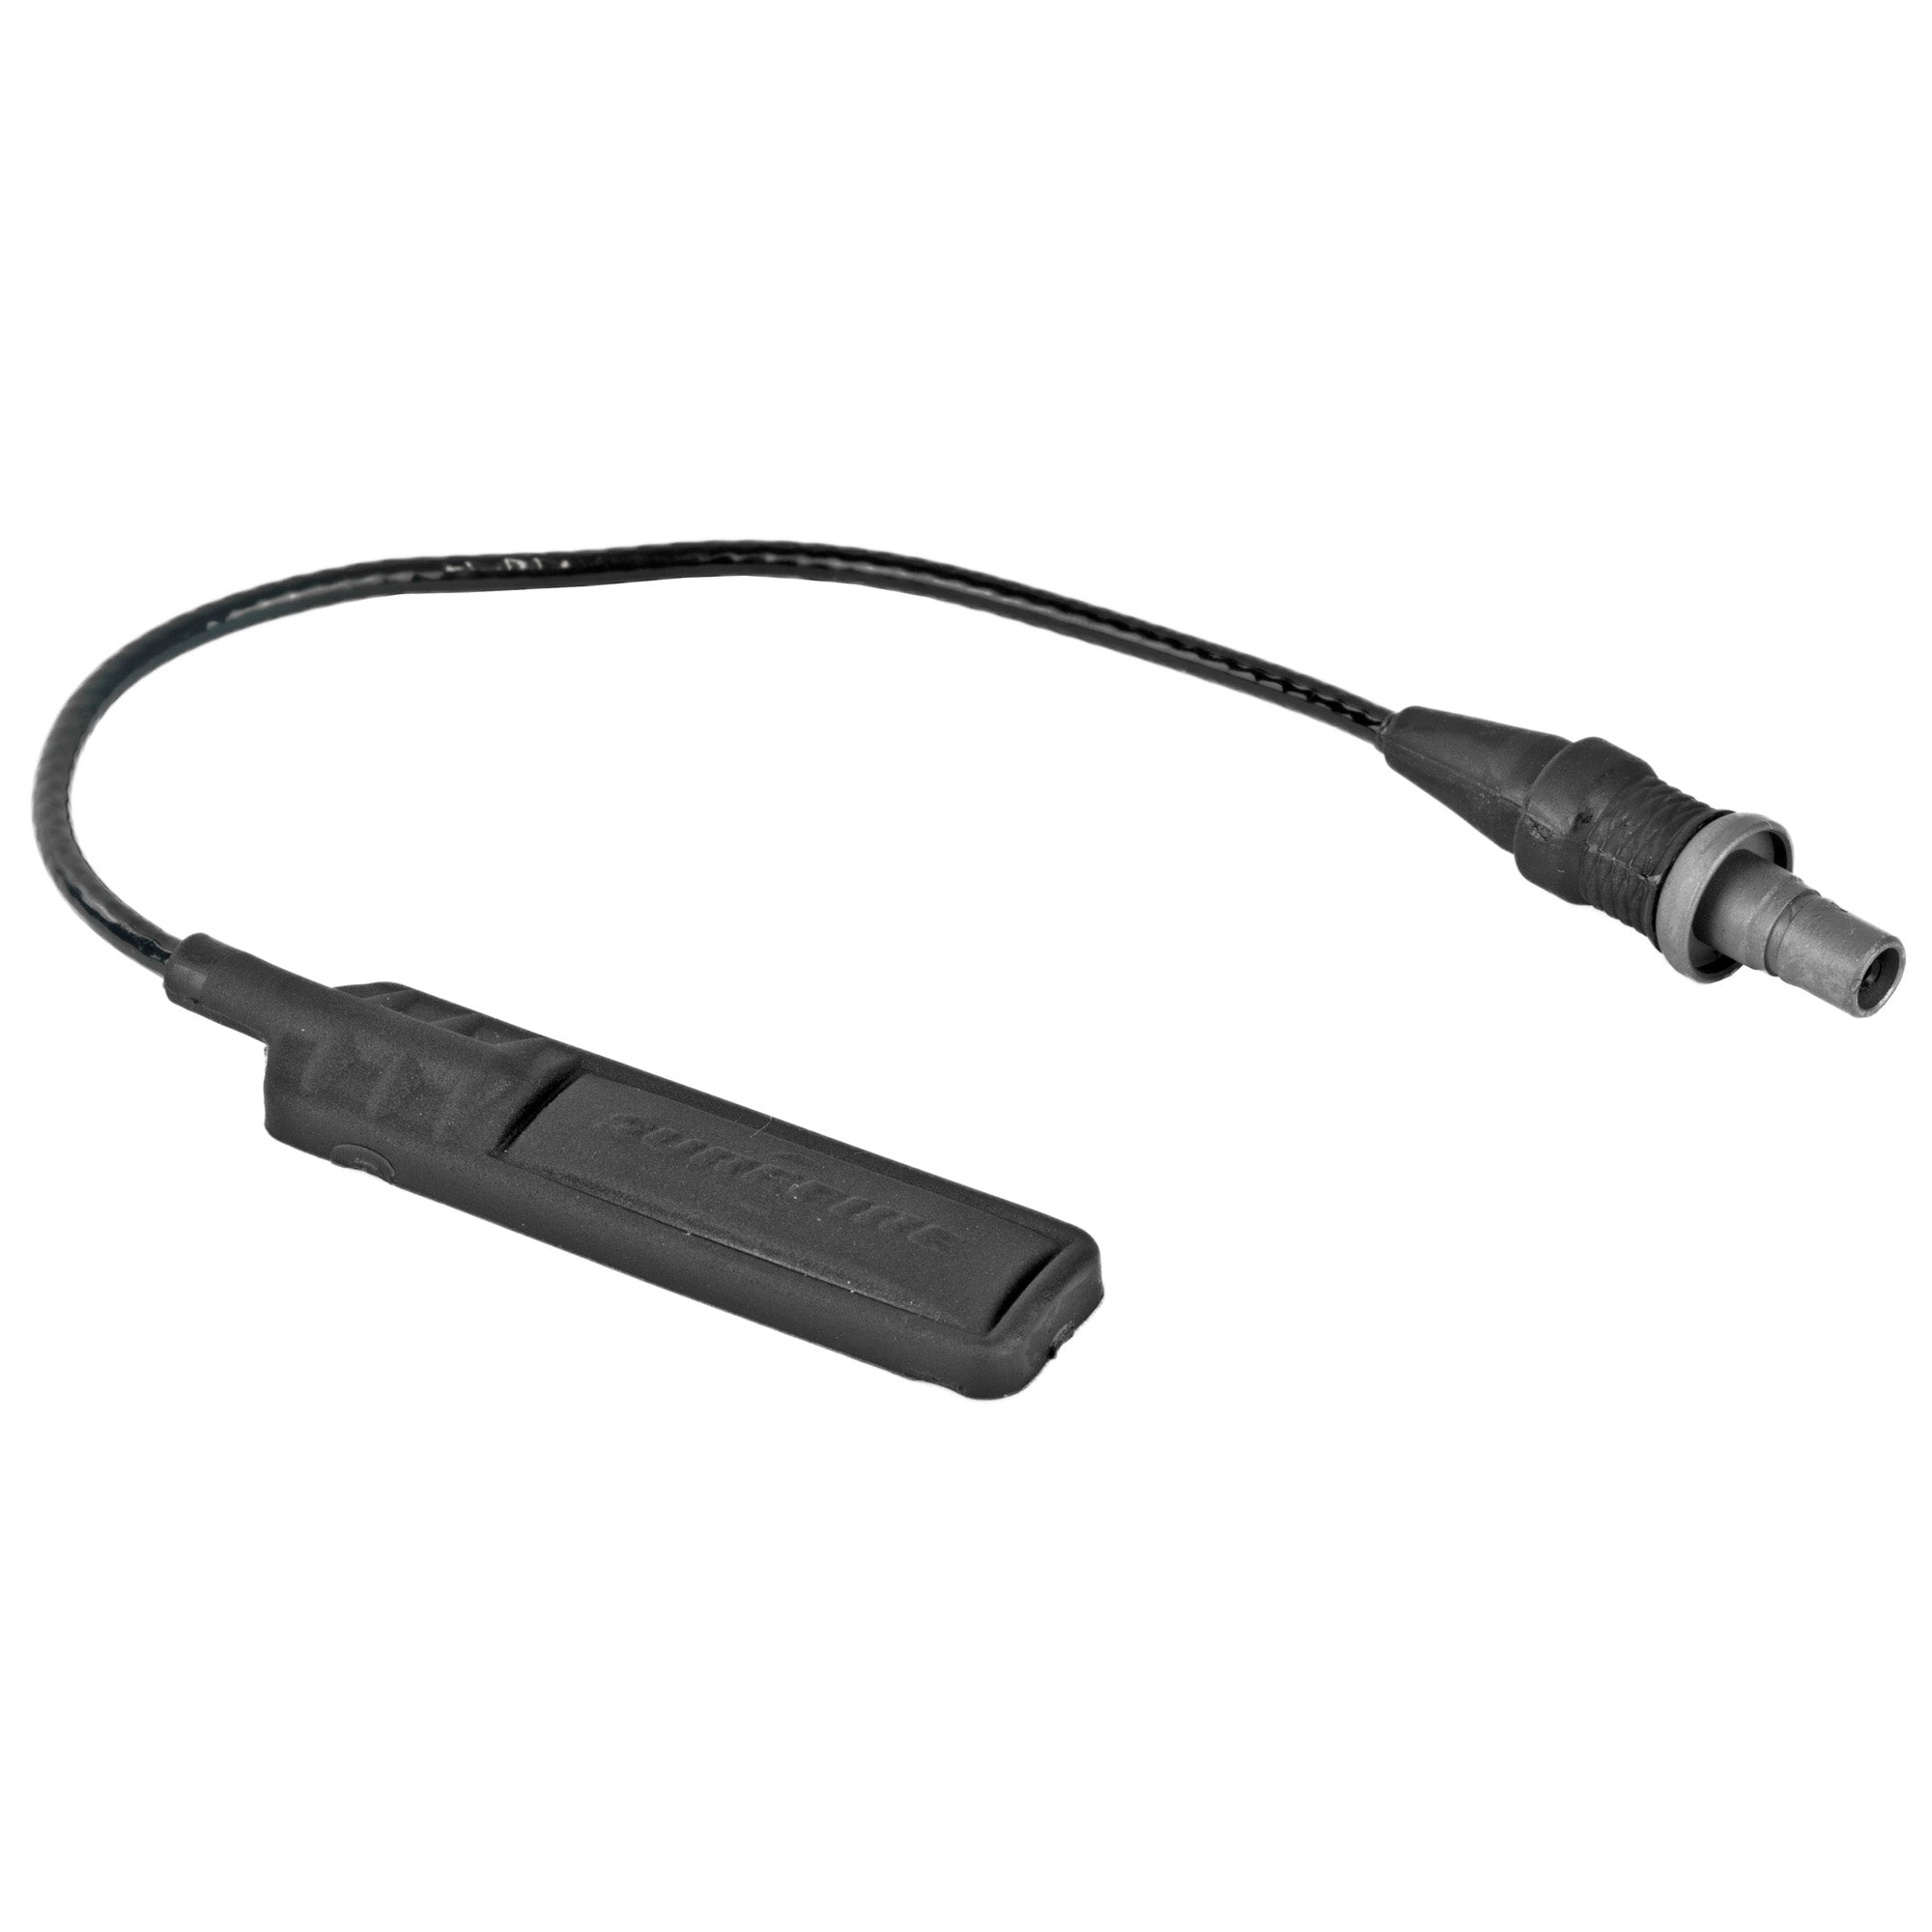 Surefire ST Remote Tape Switch in black, compatible with all Surefire weapon lights with a switch socket, featuring a 7-inch weatherproof cable.